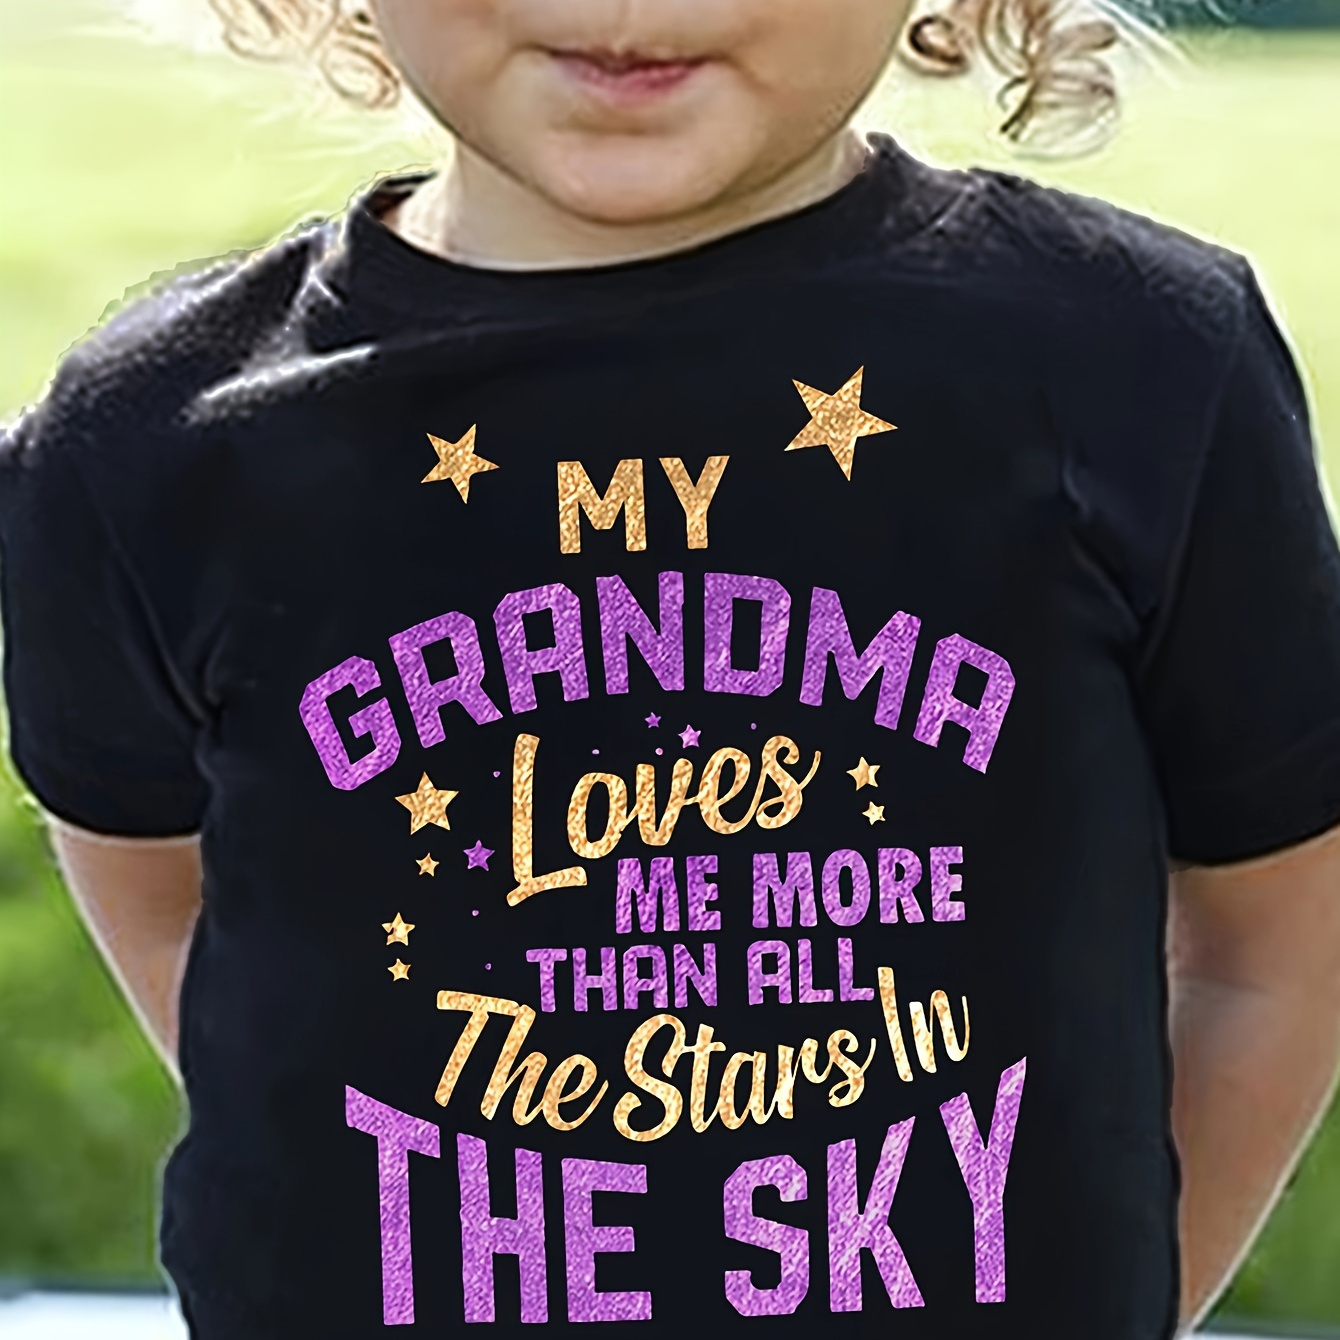 

My Grandma Loves Me... Print, Girls' Casual & Comfy Crew Neck Short Sleeve T-shirt For Spring & Summer, Girls' Clothes For Outdoor Activities